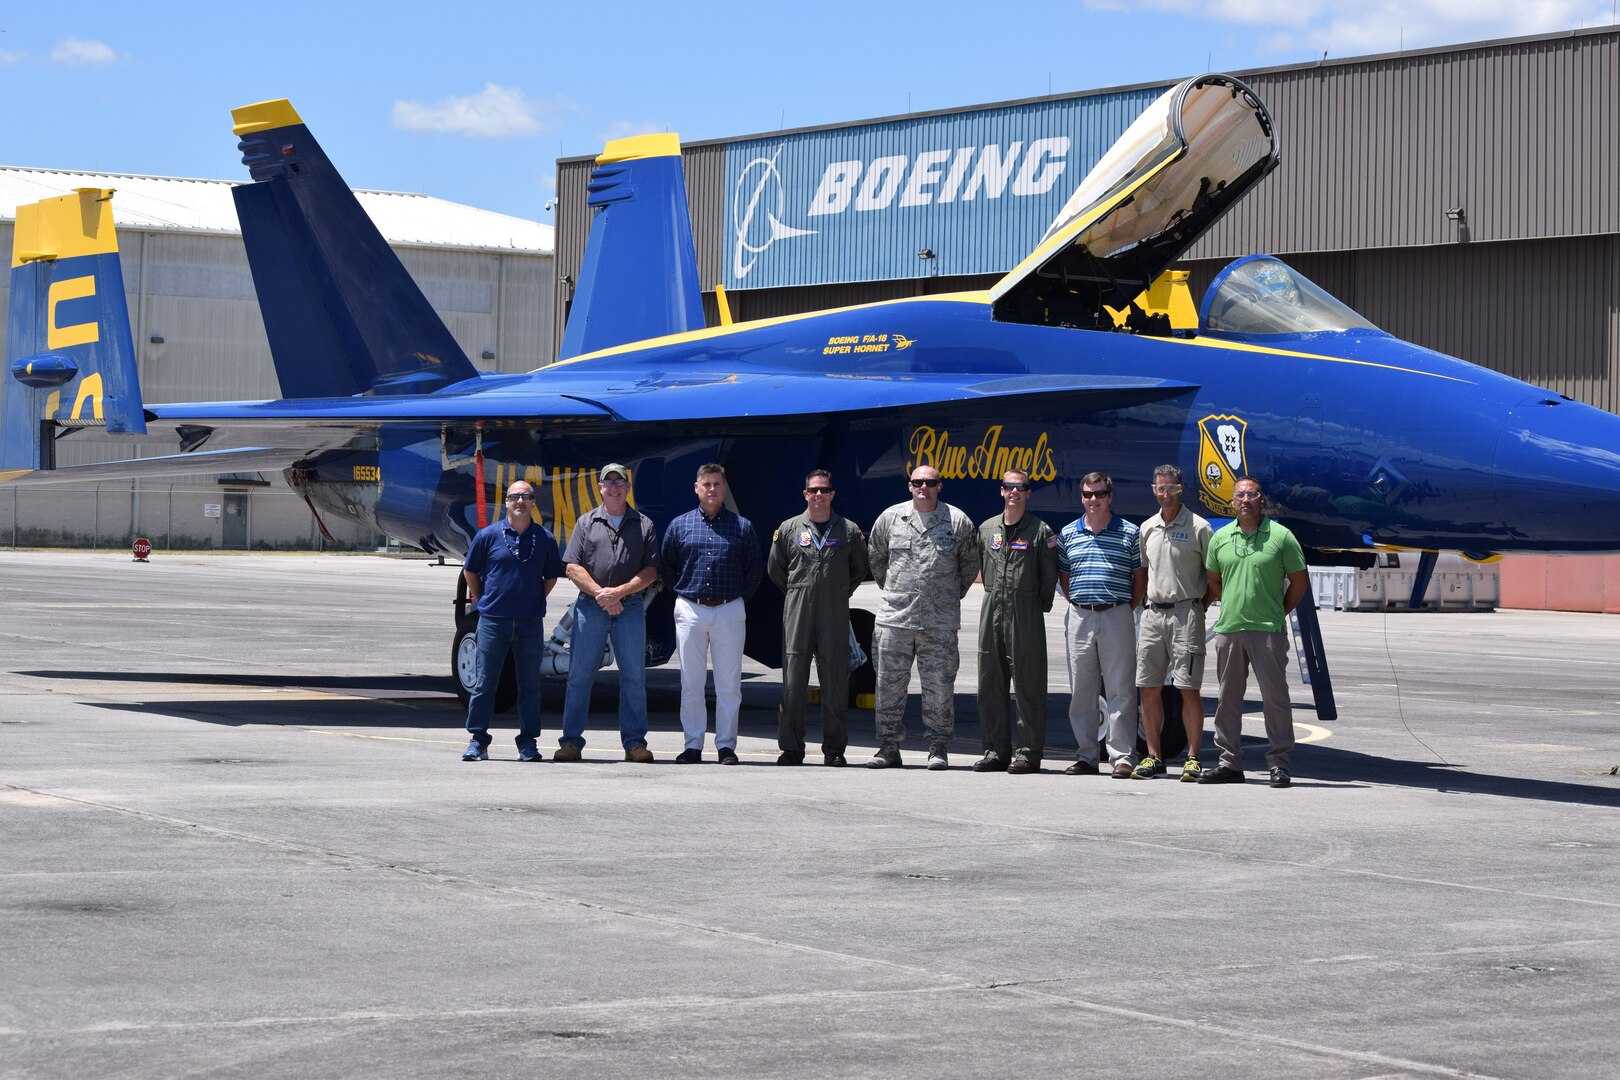 Nine people stand in front of a blue fighter jet with yellow trim